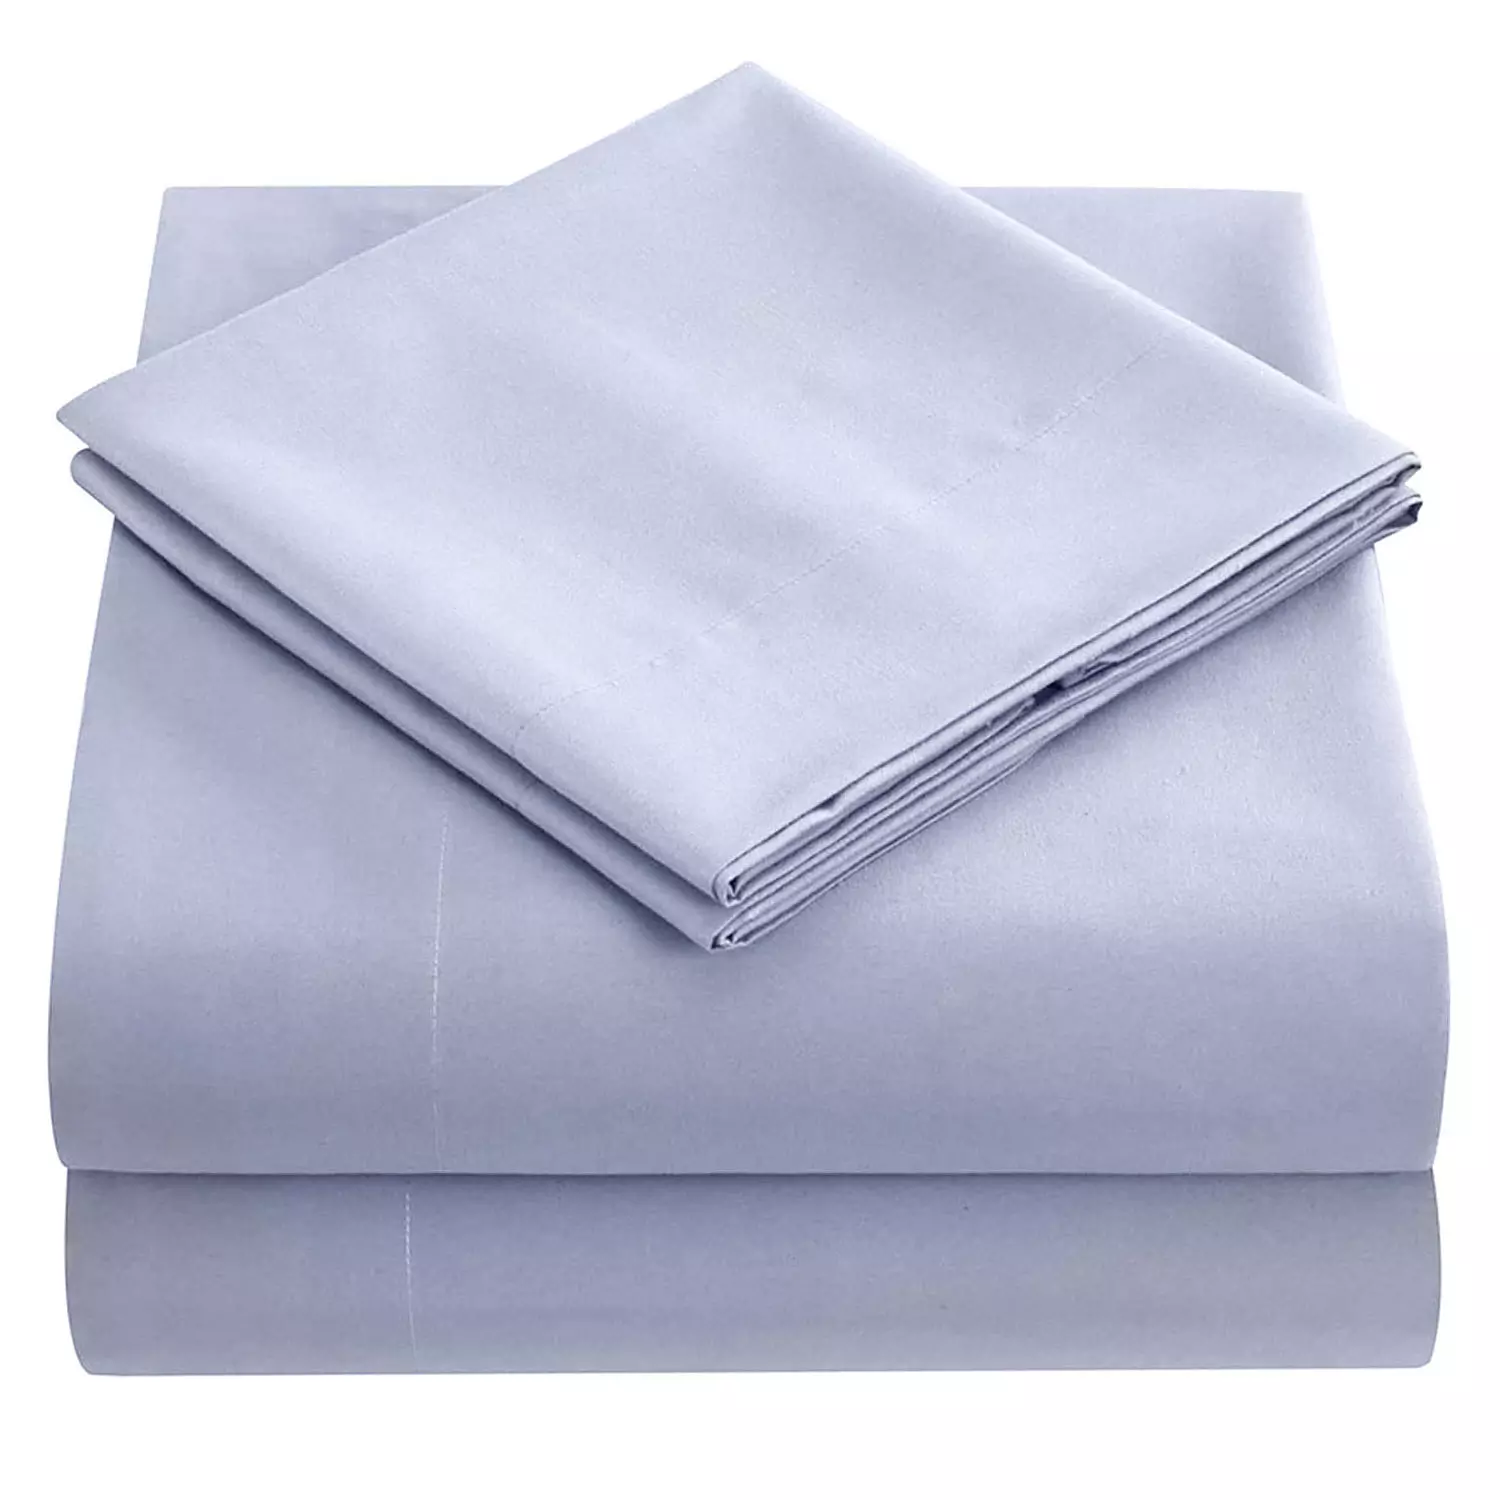 Solid colored brushed sheet set, double, light blue